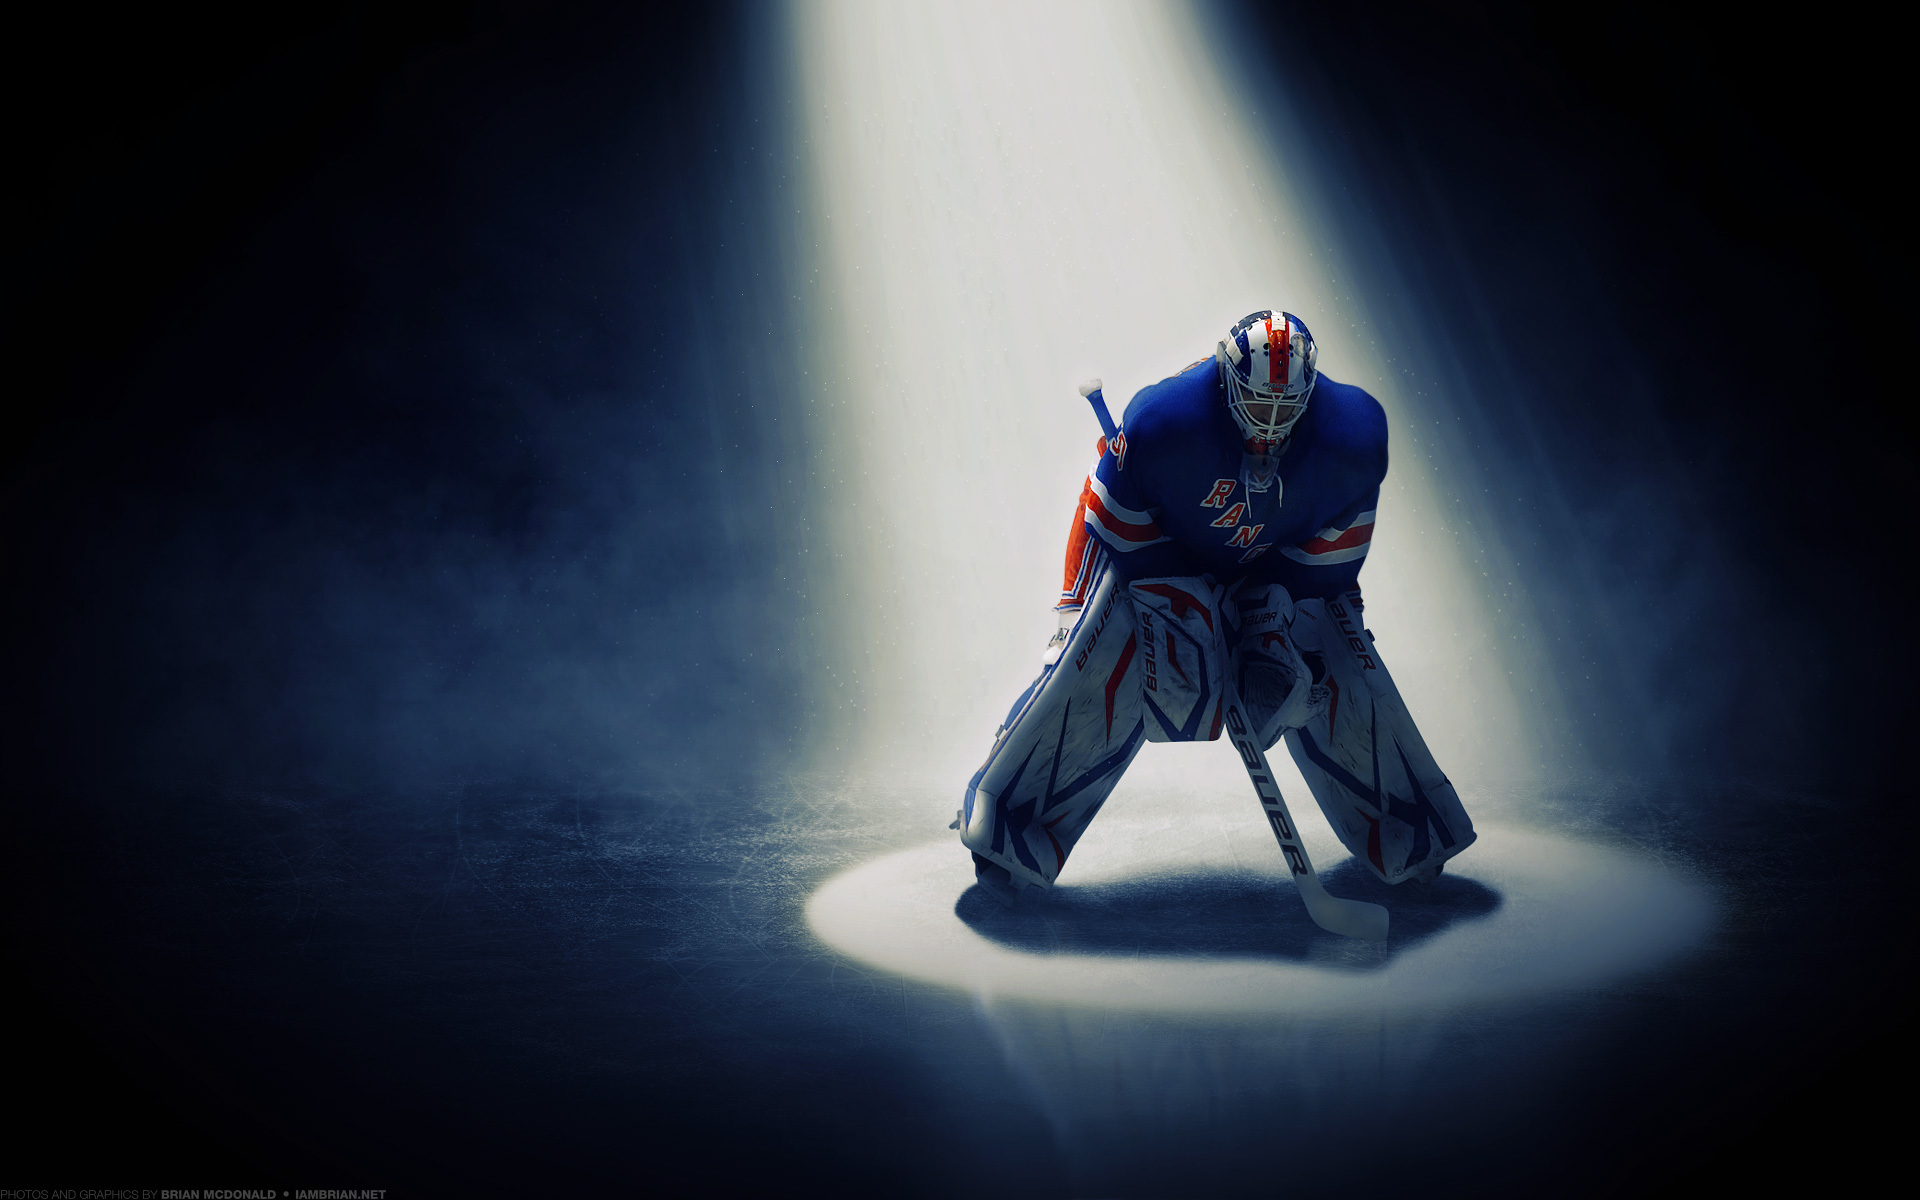  New york rangers Henrik Lundqvist wallpapers and images   wallpapers